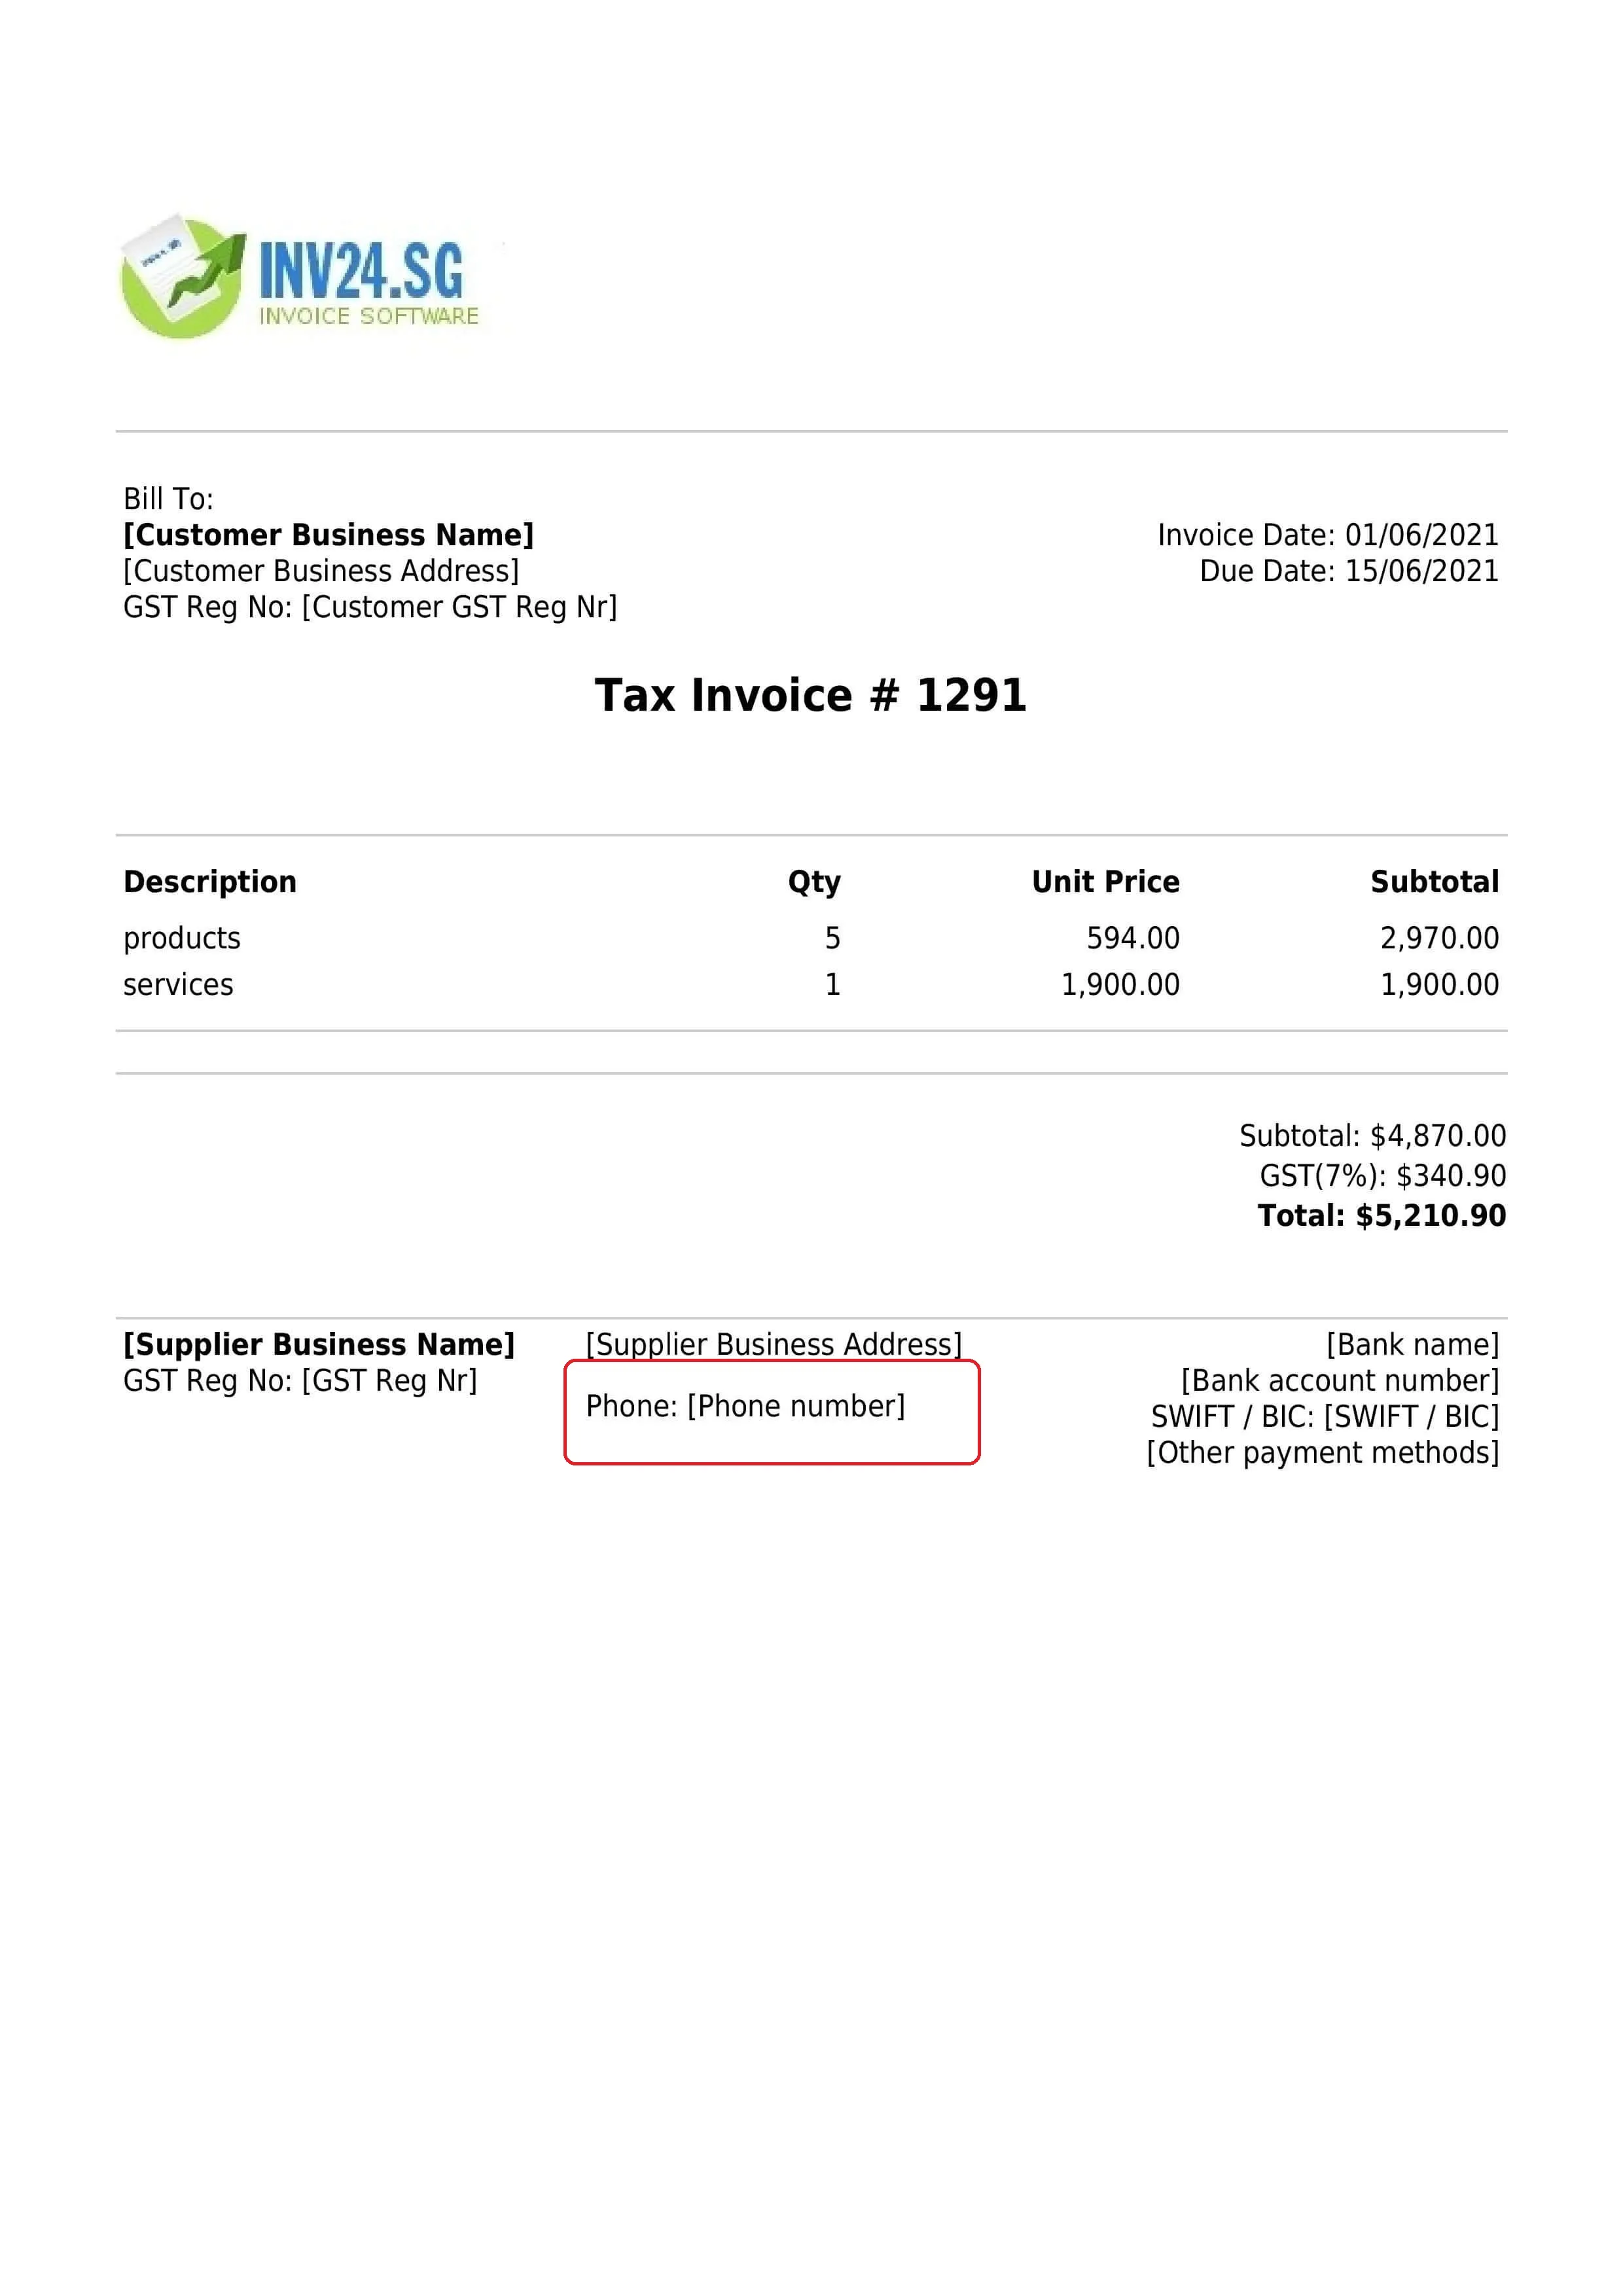 invoice seller's business phone number